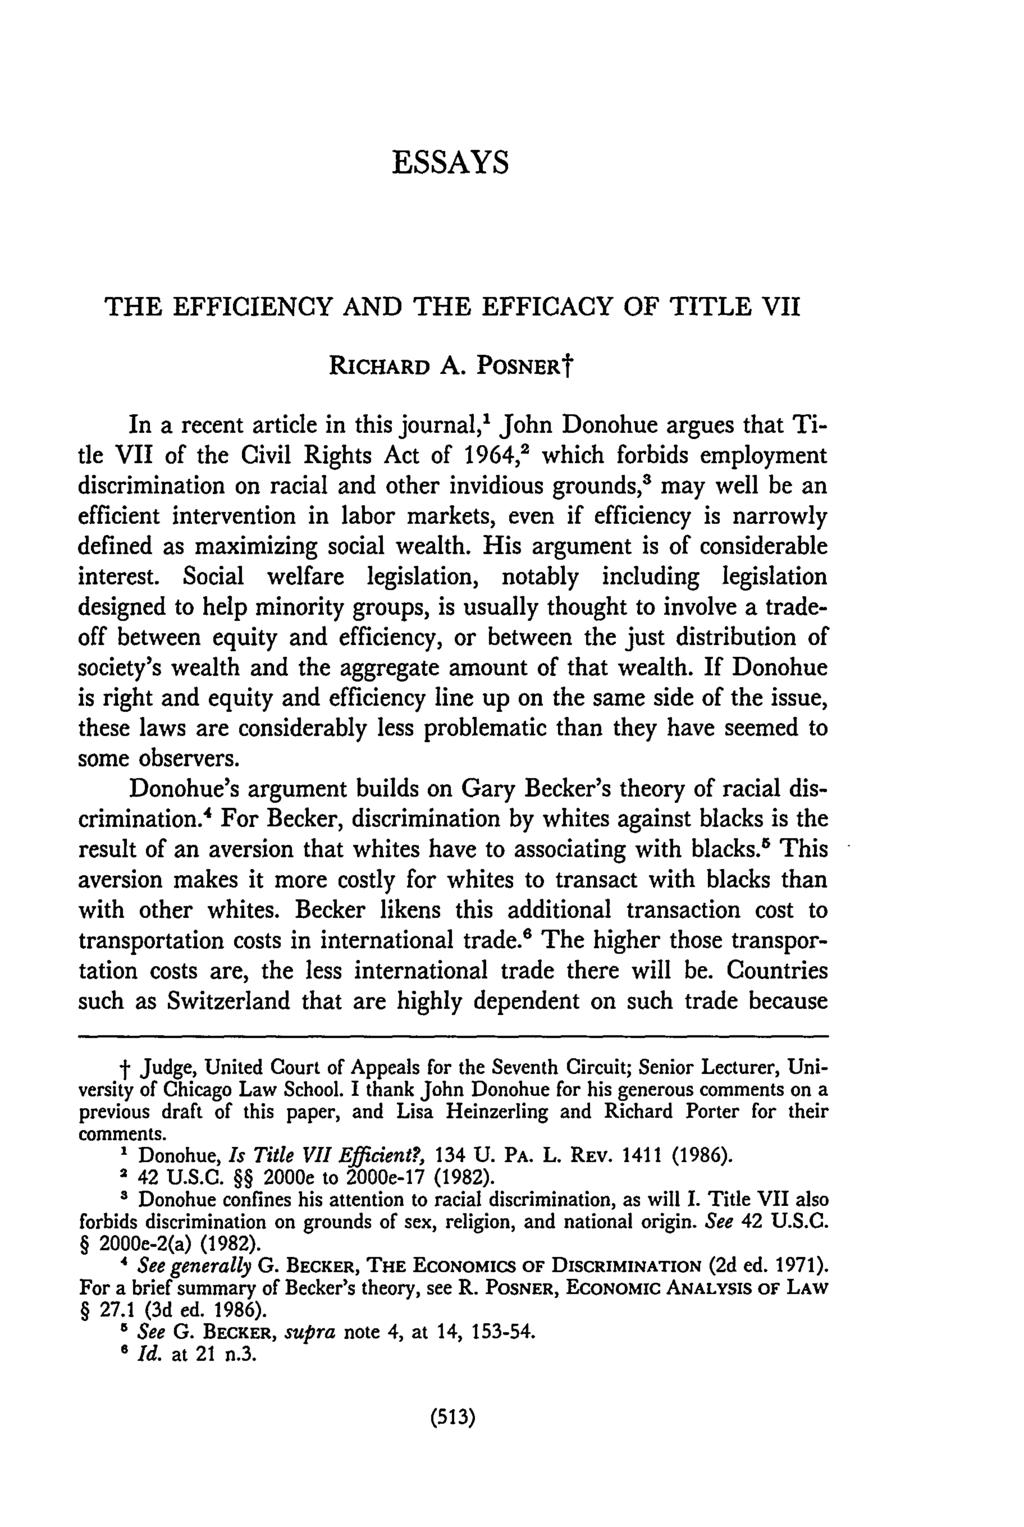 ESSAYS THE EFFICIENCY AND THE EFFICACY OF TITLE VII RICHARD A.